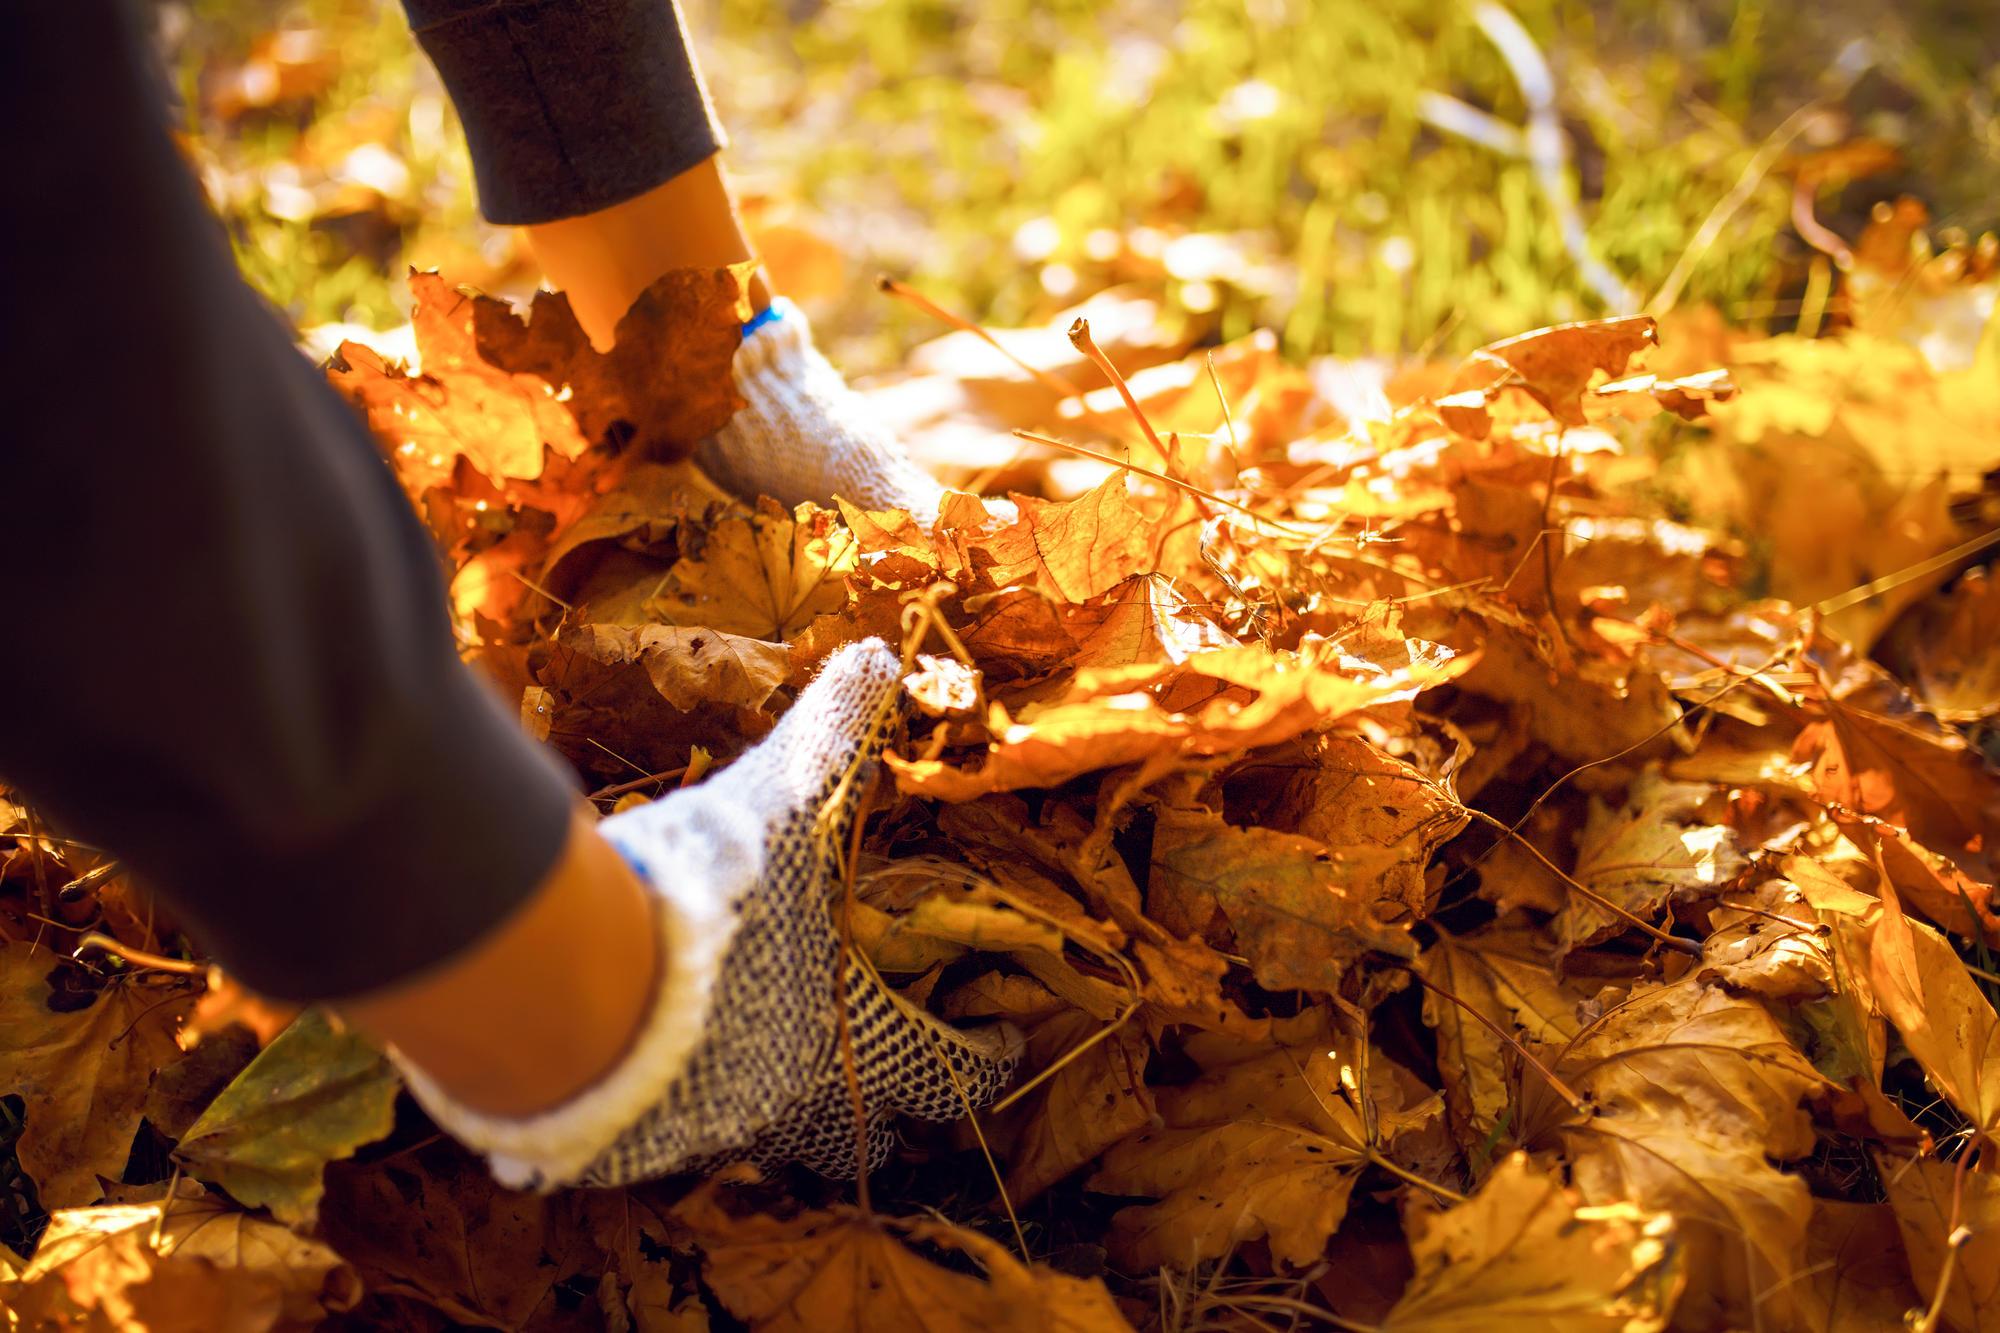 A gardener moving fallen leaves with gloved hands.